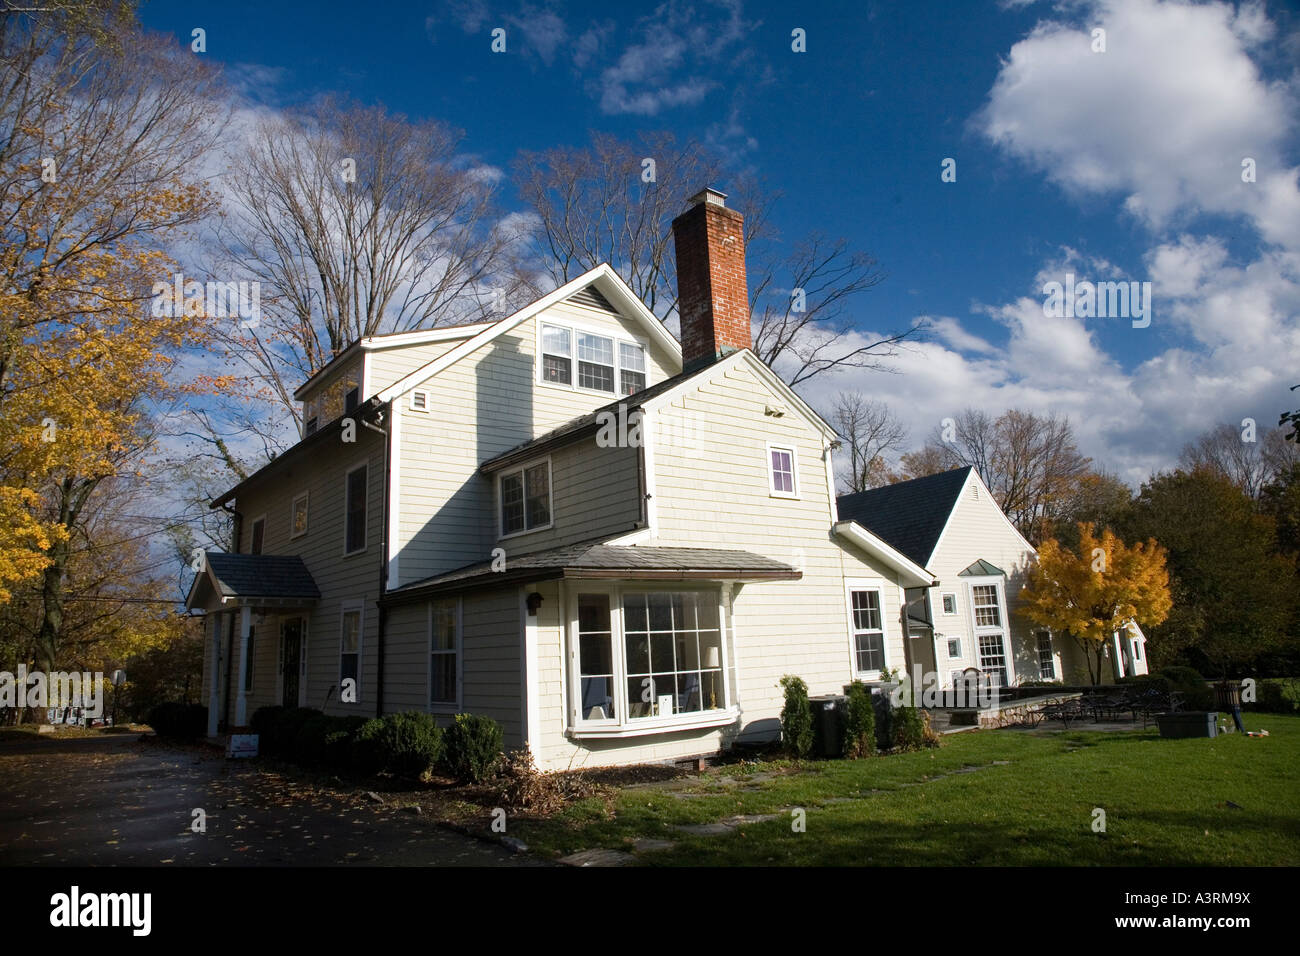 Typical New England wooden house Wilton Connecticut USA Stock Photo